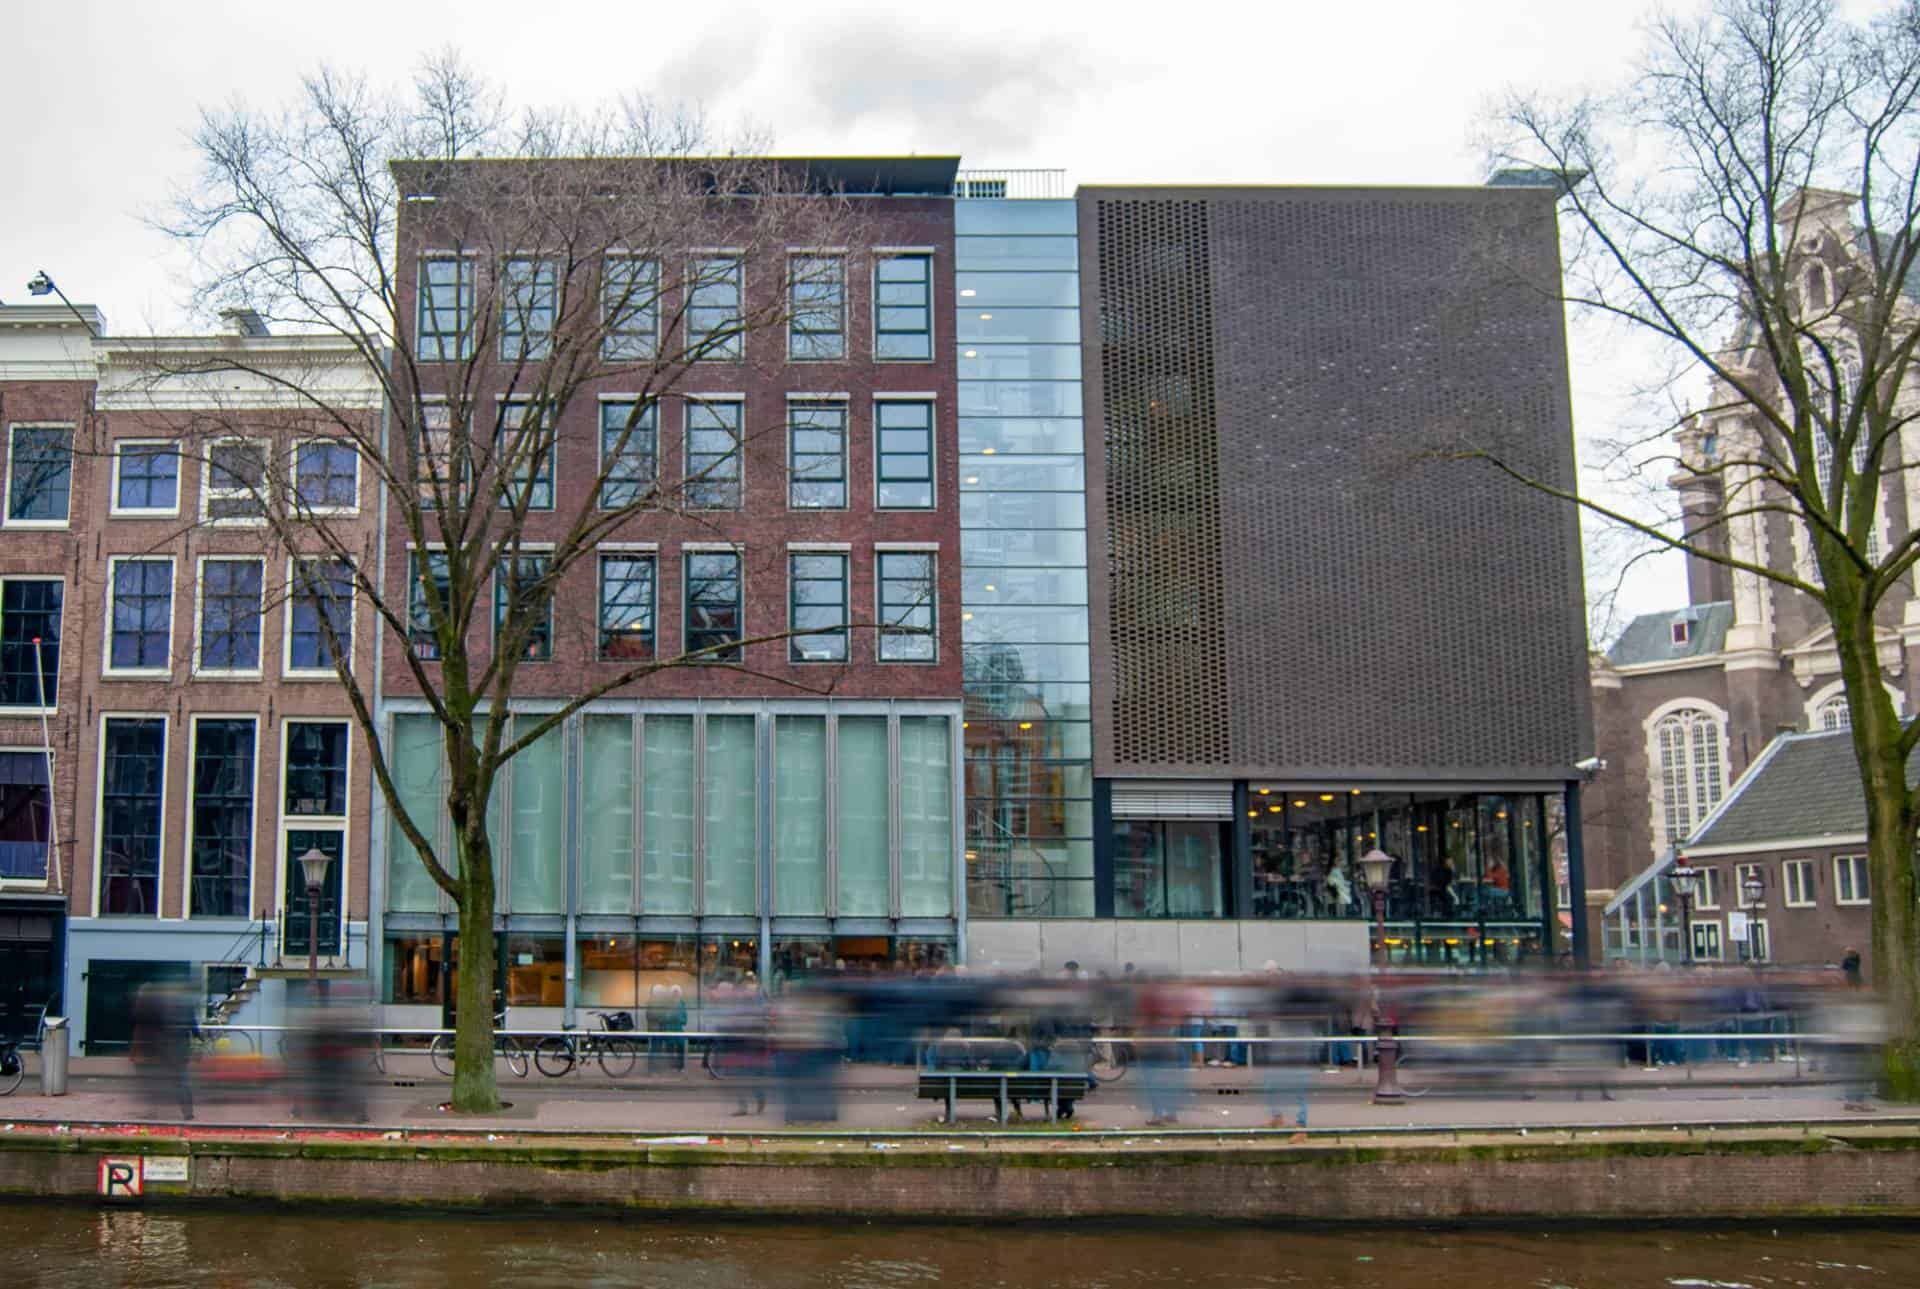 The Anne Frank House and Museum in Amsterdam.